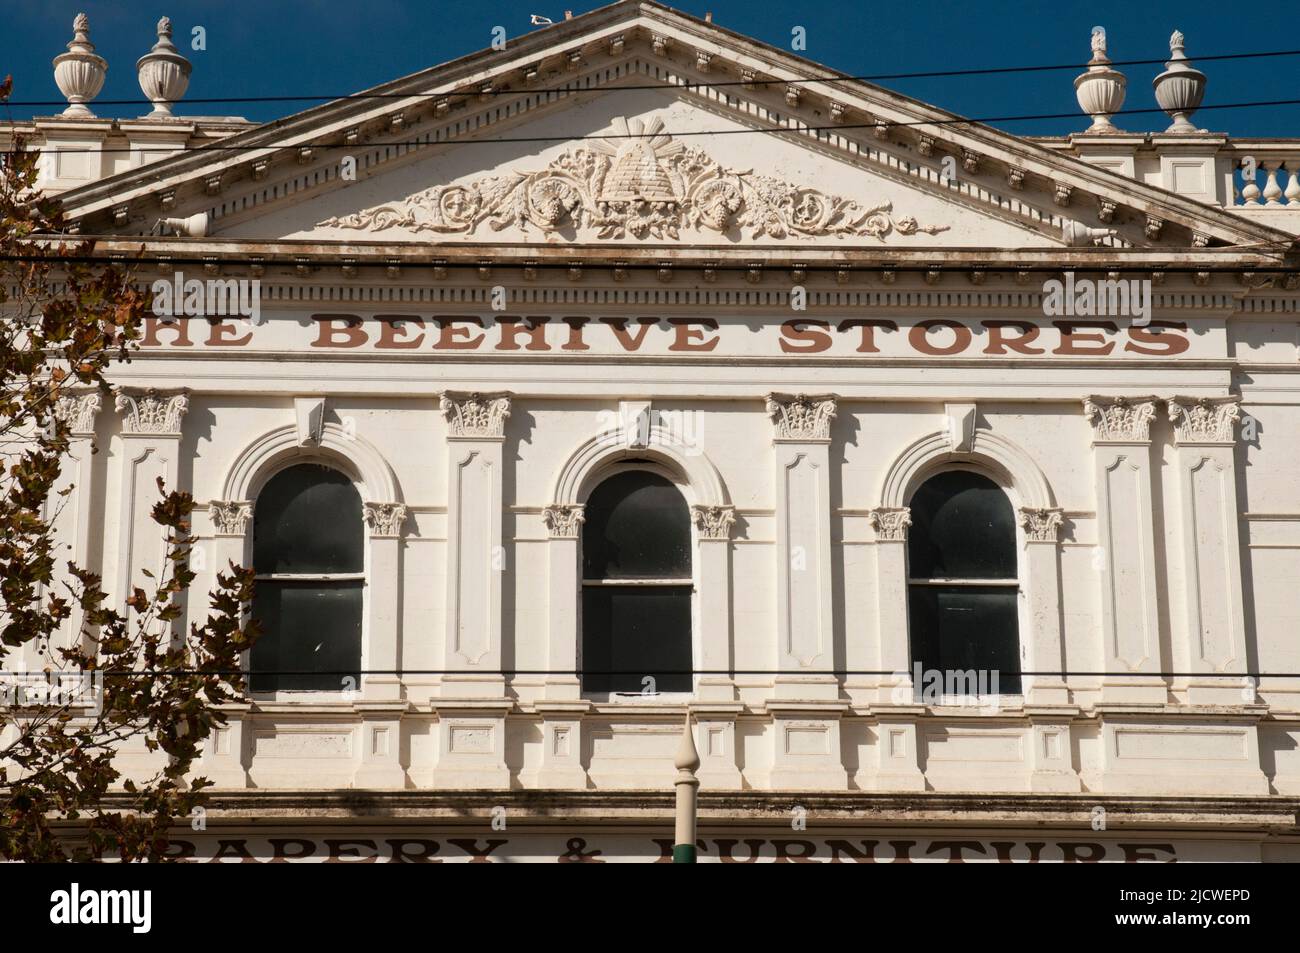 1872 Beehive Building, accommodating a mining exchange plus stores,  in the Victorian goldfields city of Bendigo, Australia Stock Photo